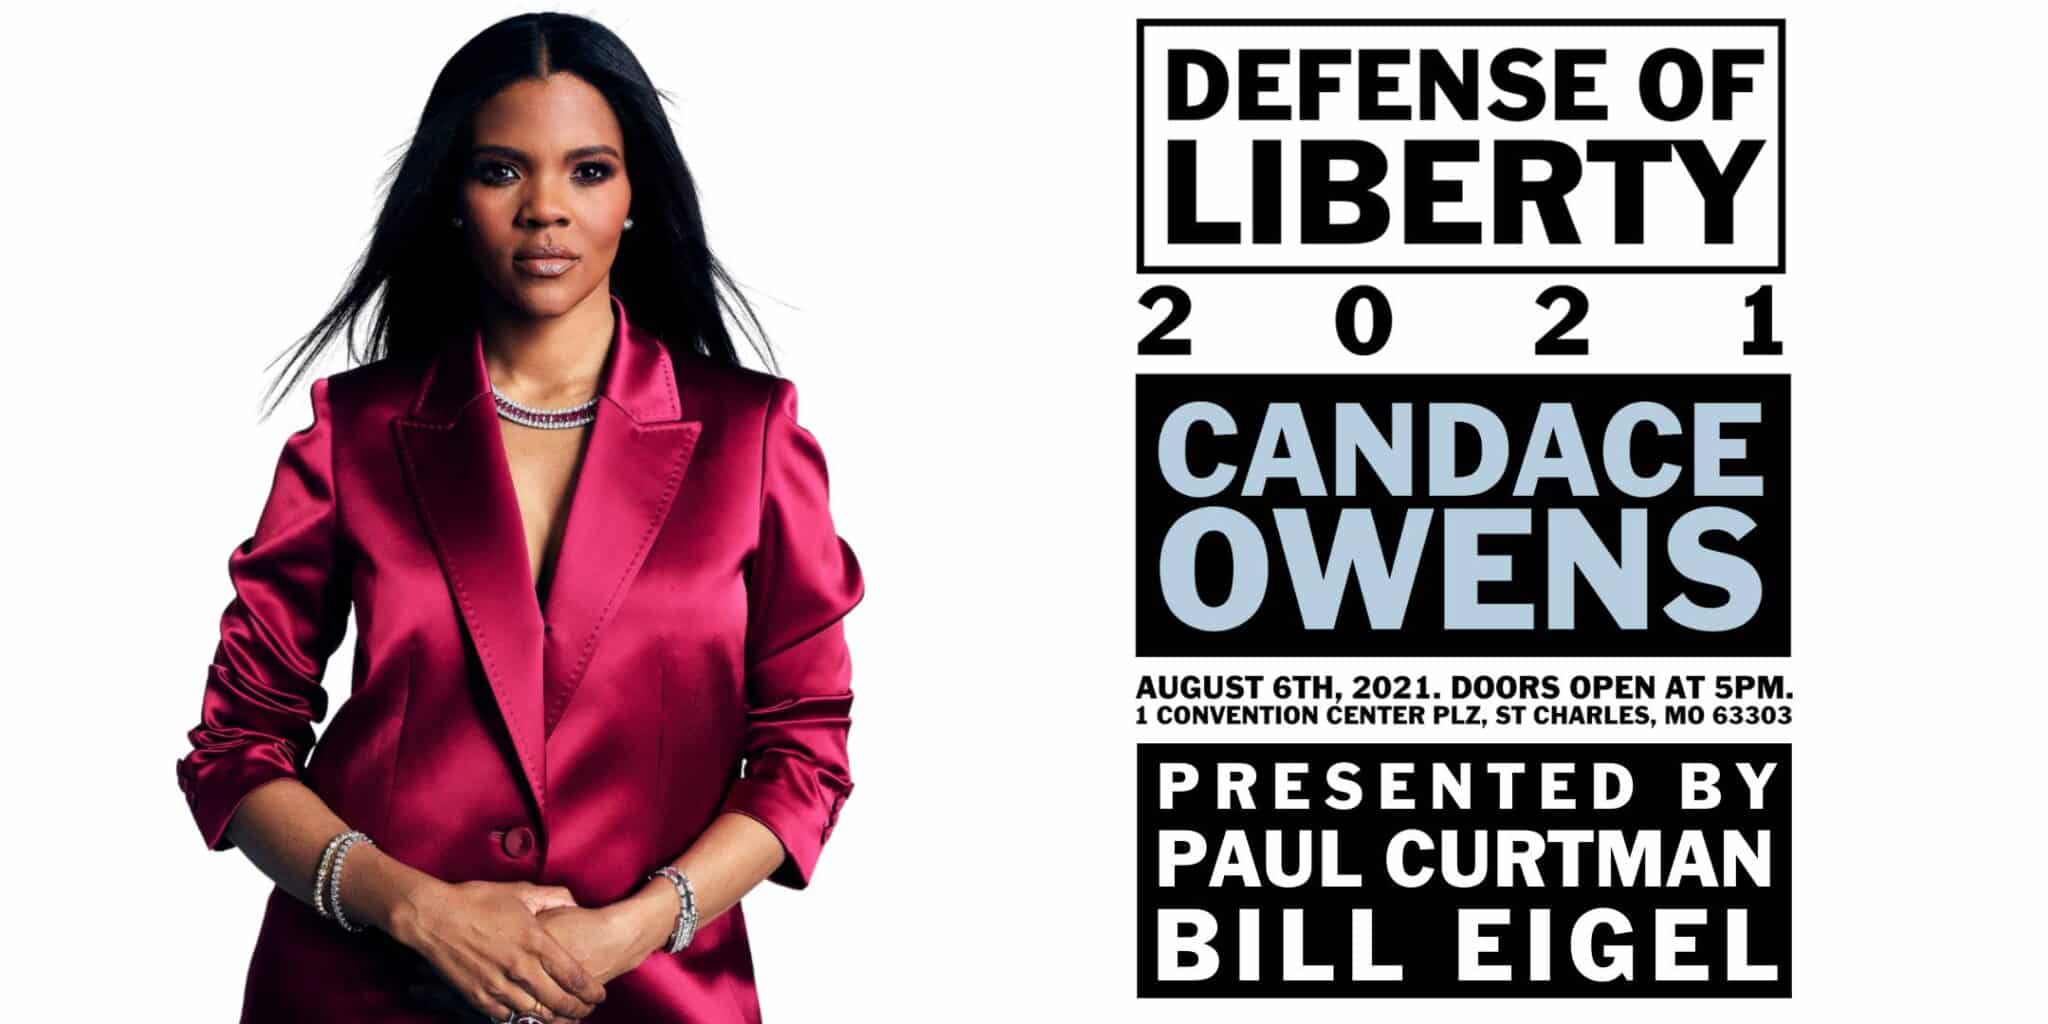 Meet Candace Owens in St. Charles Missouri August 6th